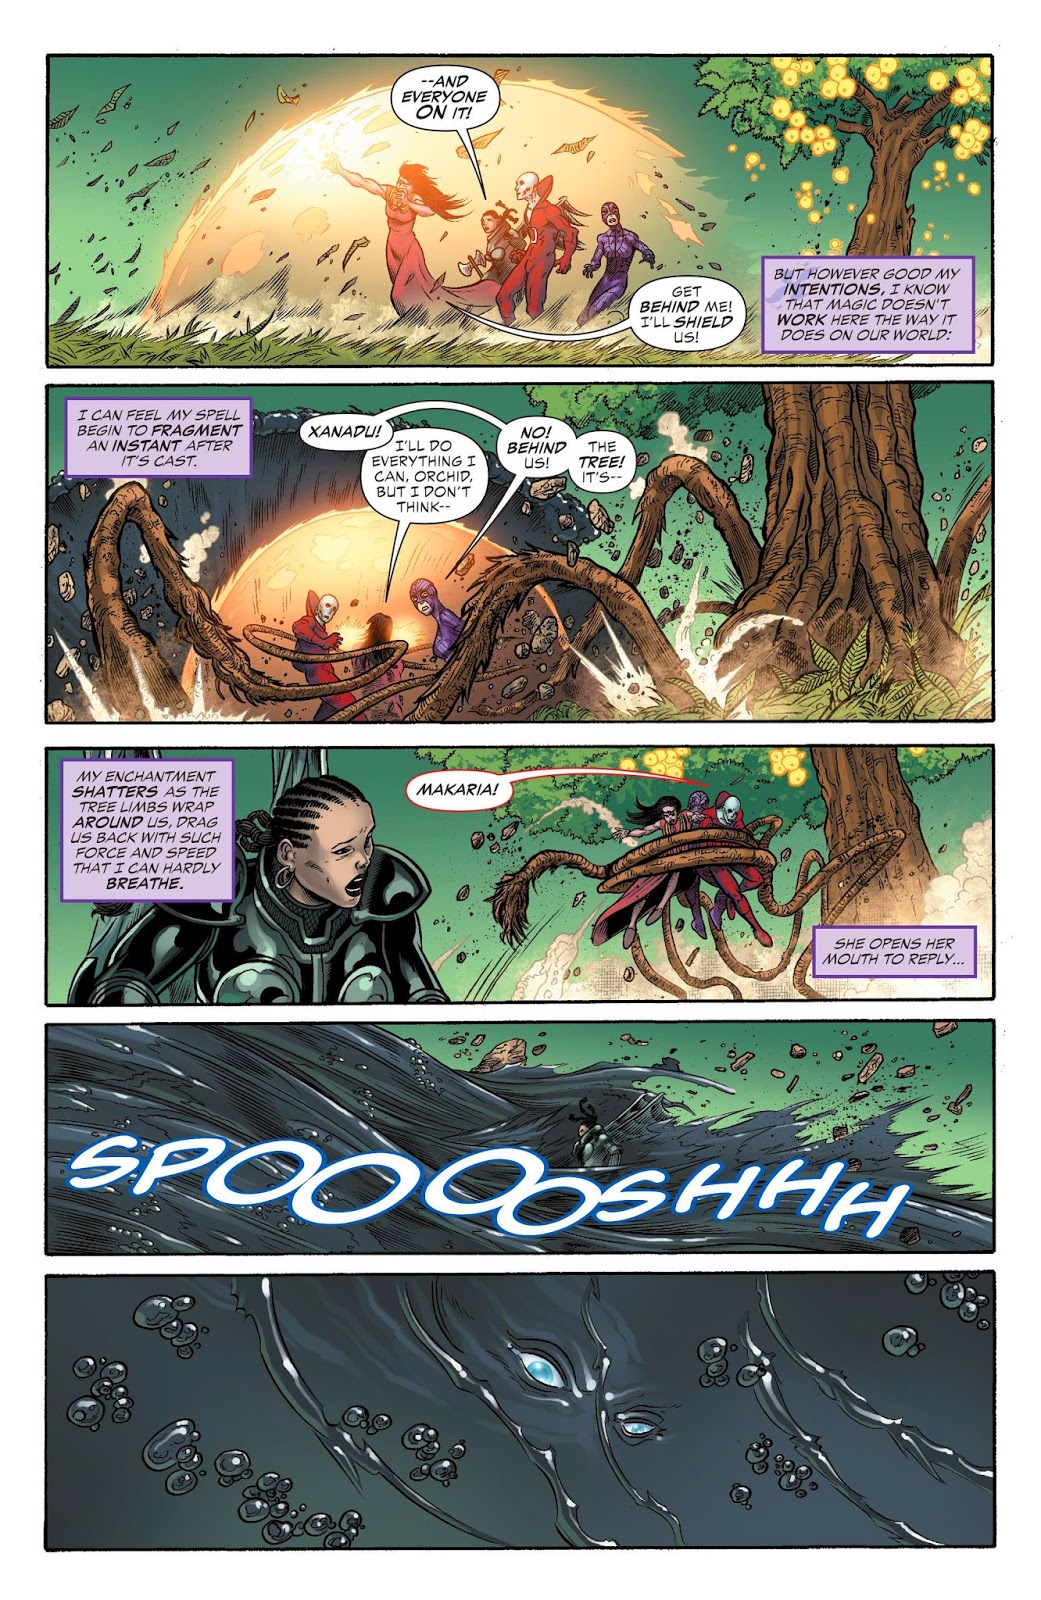 I Fucked The World Tree Weird Science DC Comics: Justice League Dark #38 Review and *SPOILERS*